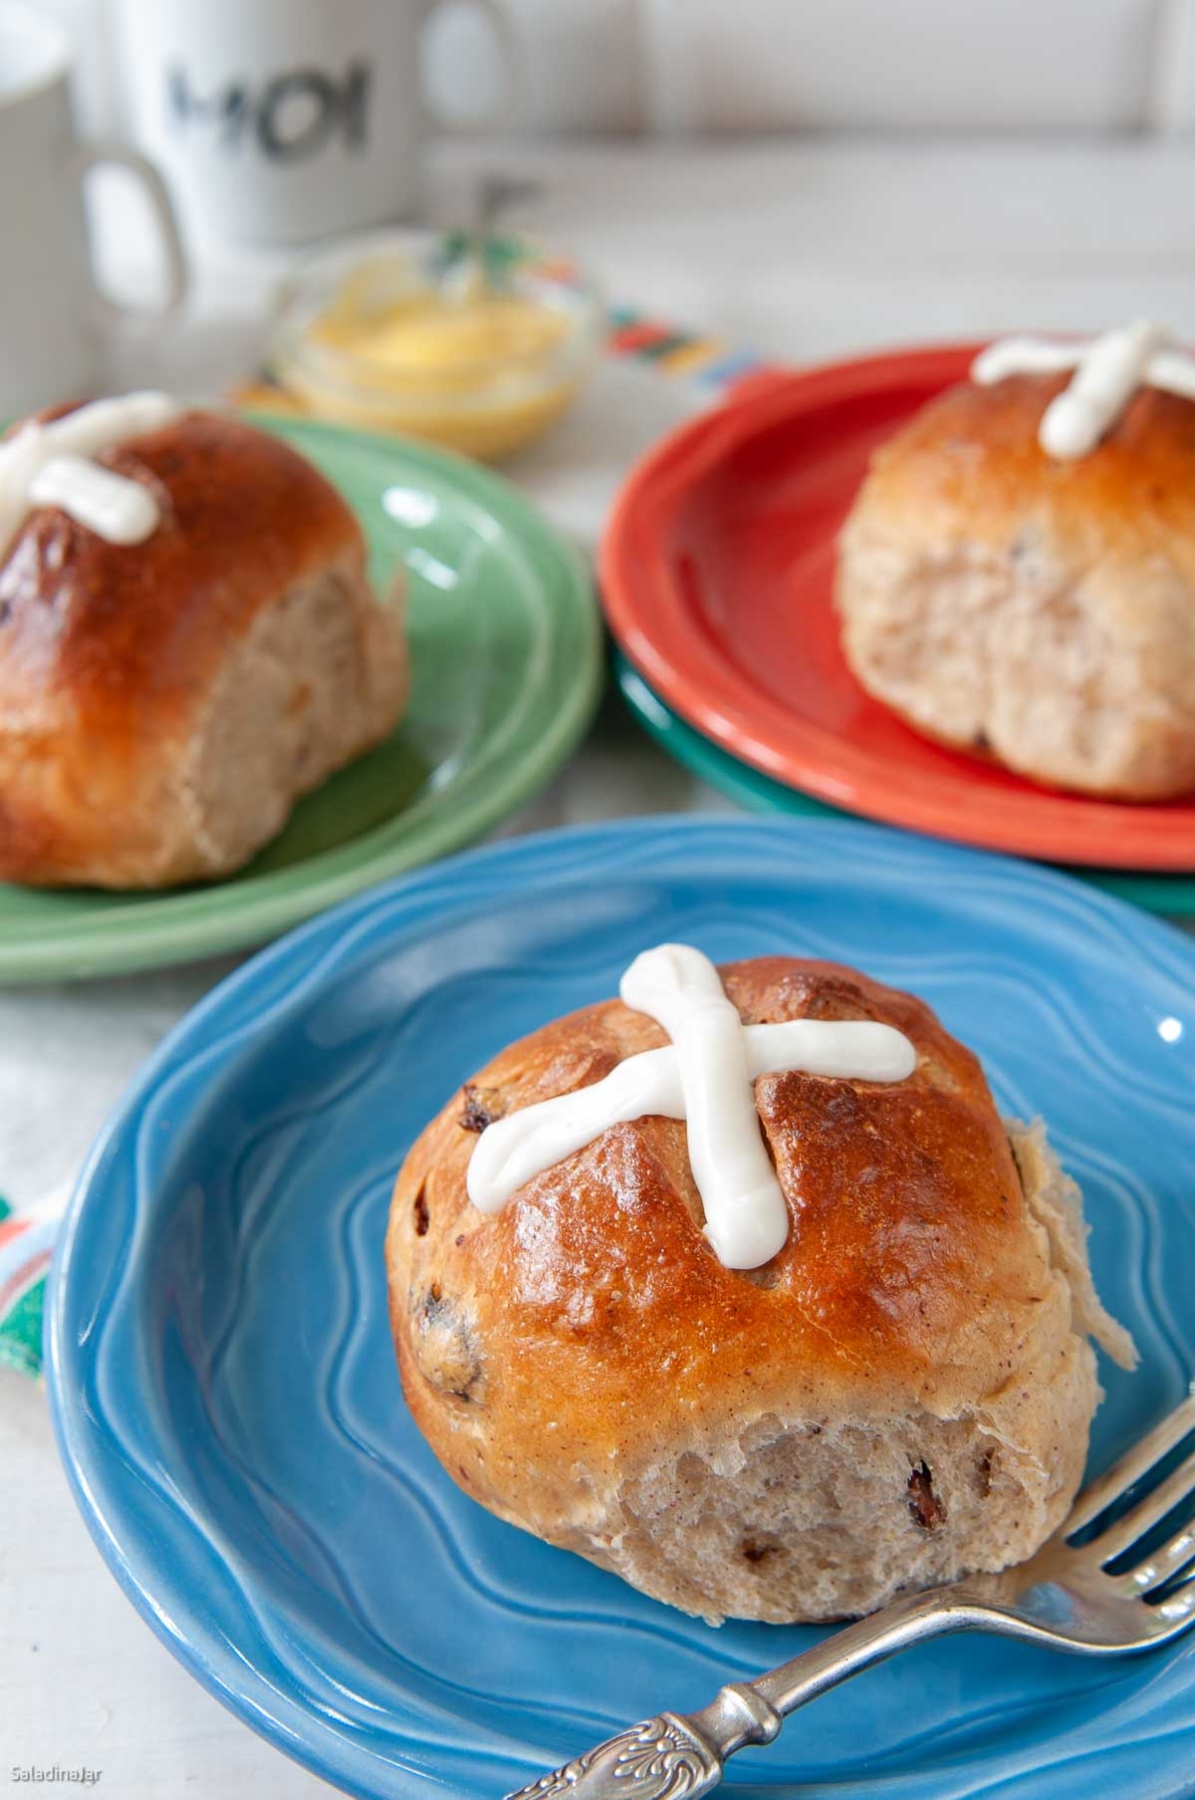 hot cross buns on brightly colored plates.